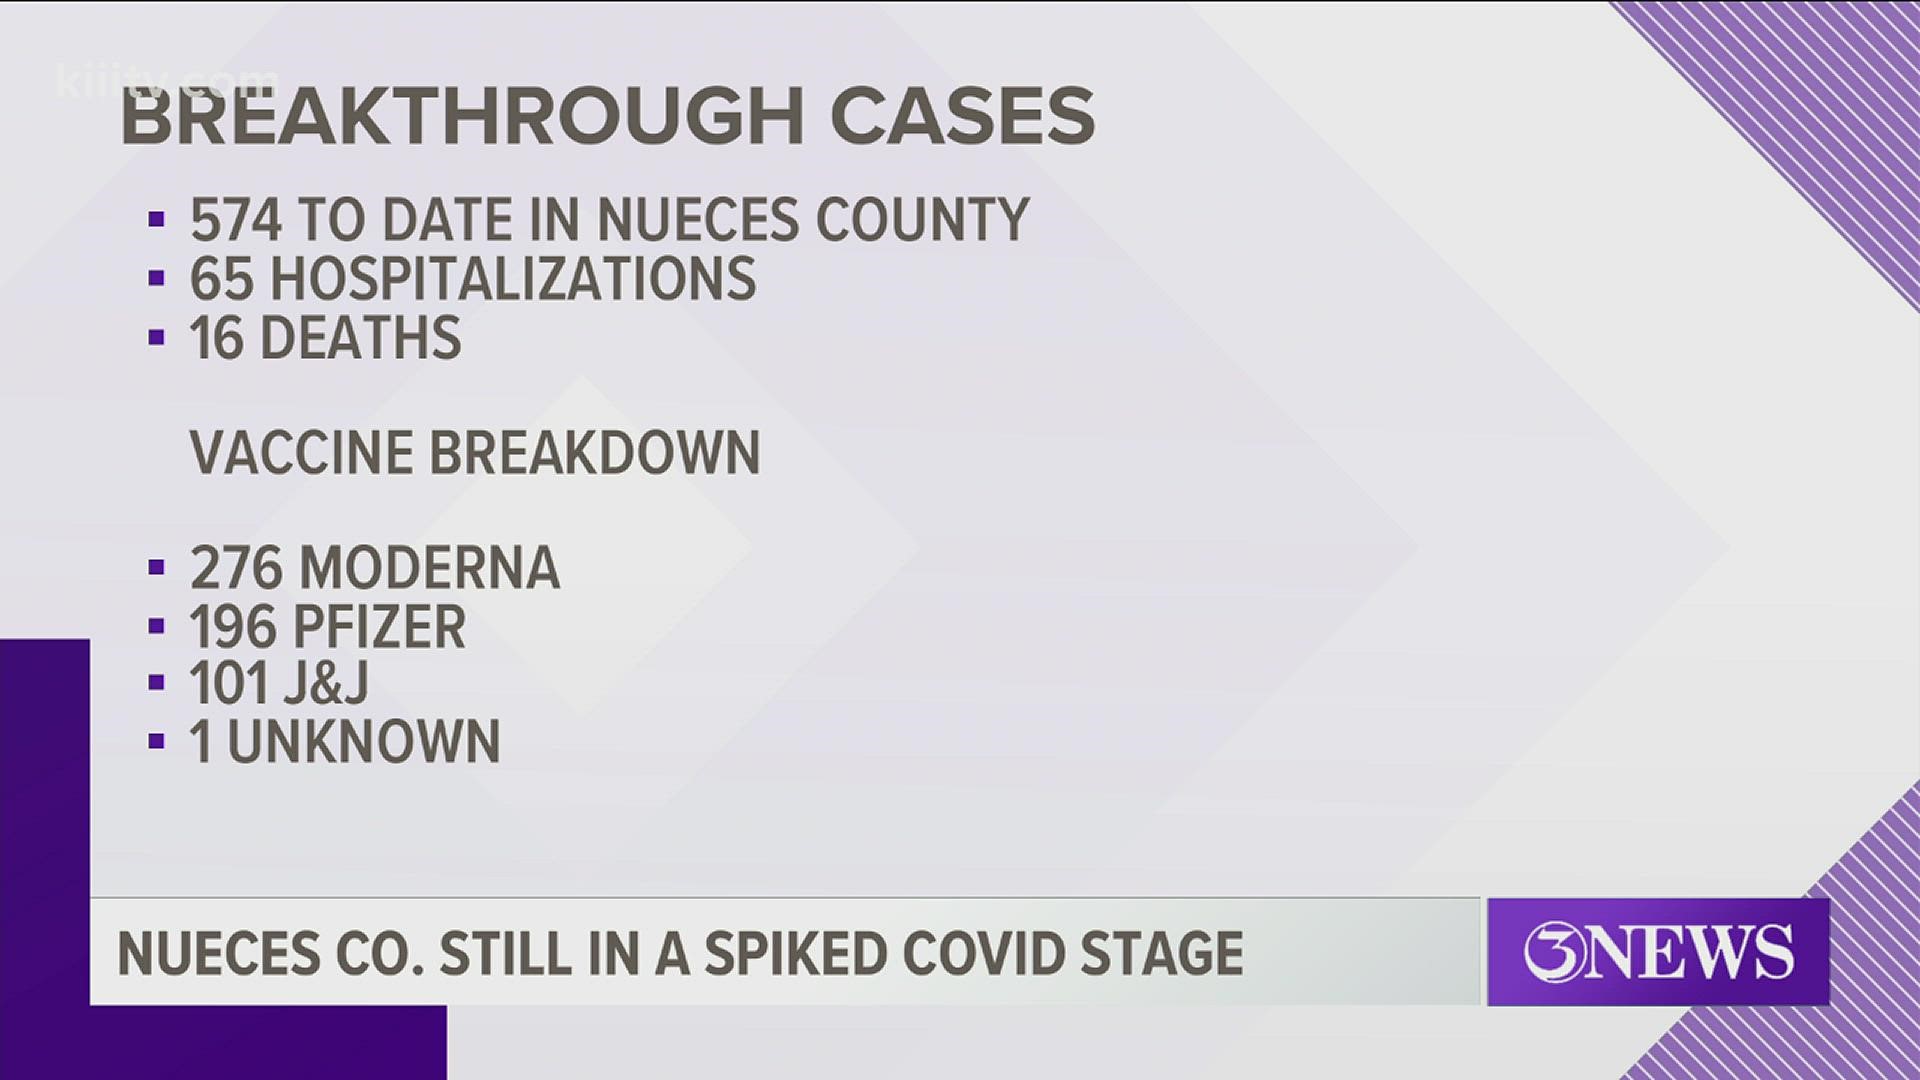 Breakthrough cases are now up to 574. Of those, 65 people were hospitalized. 16 people died.